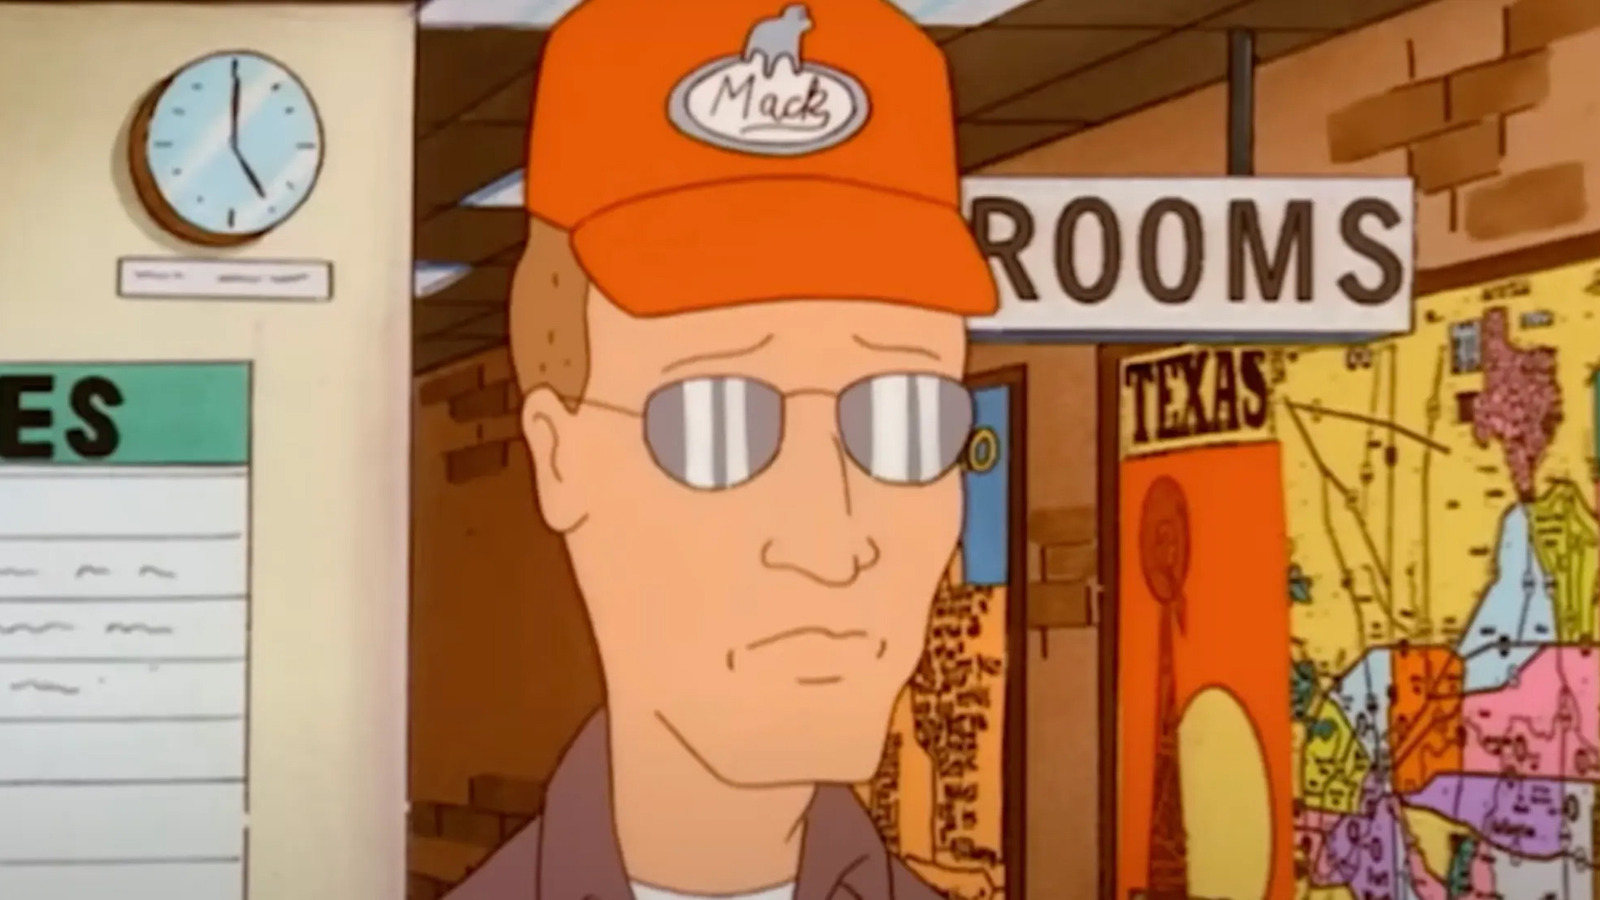 king of the hill characters dale